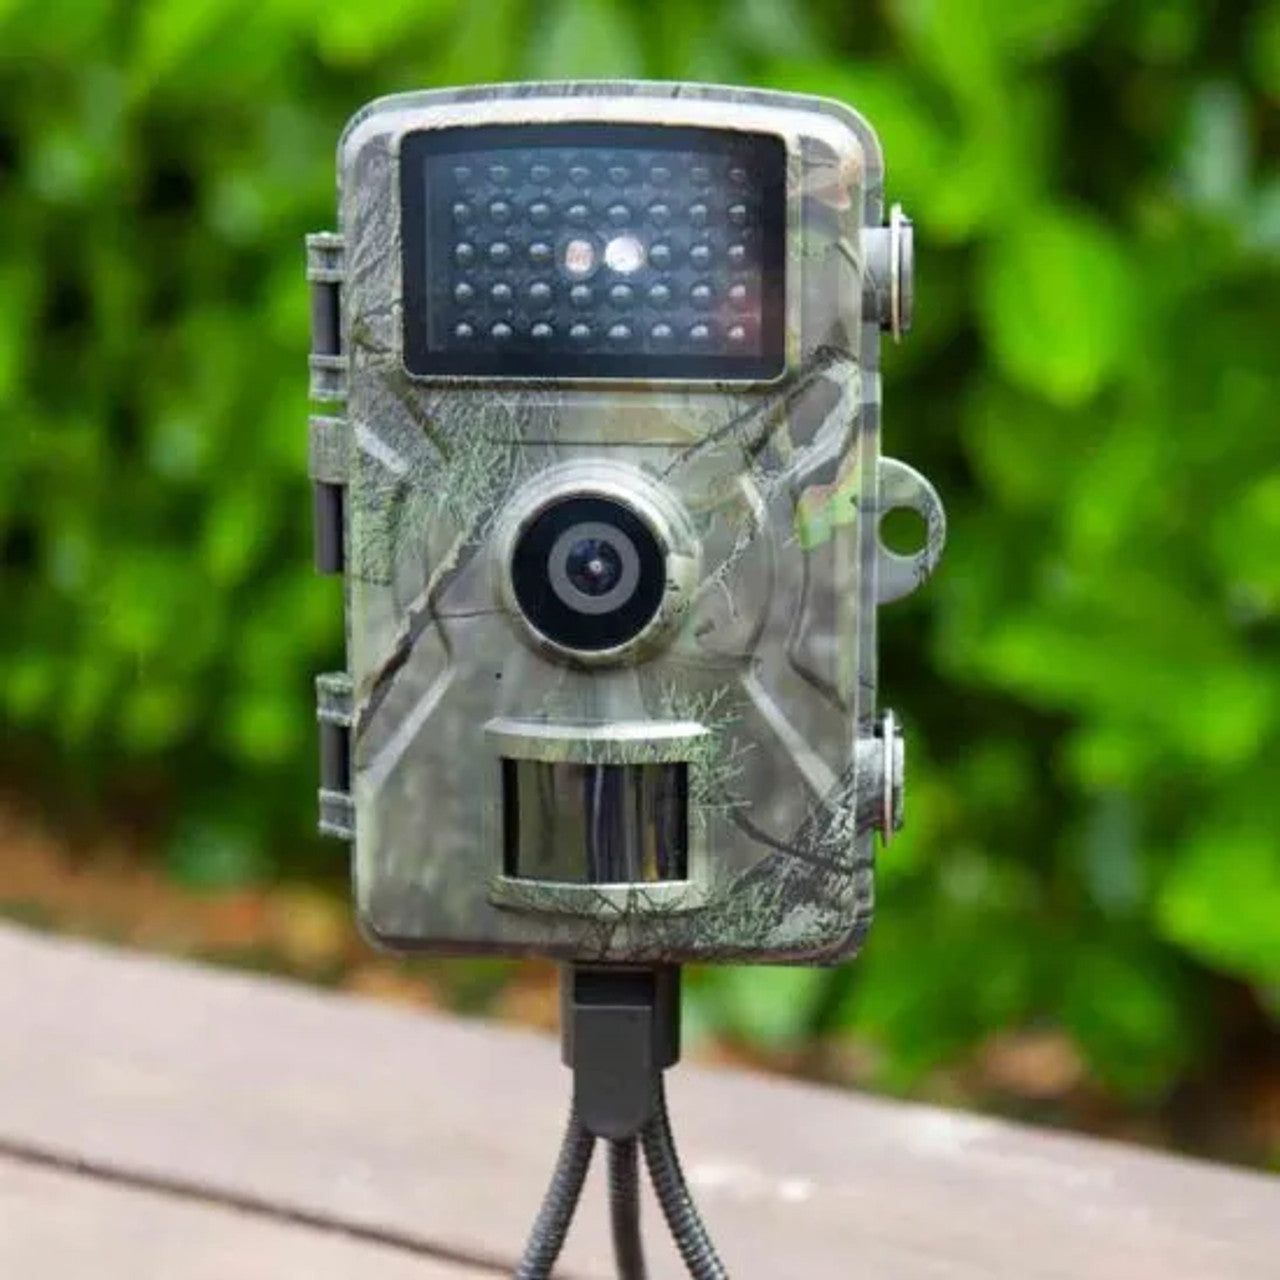 1080p 4k summit wildlife camera, night vision infra red sensors for recording animals in the wild